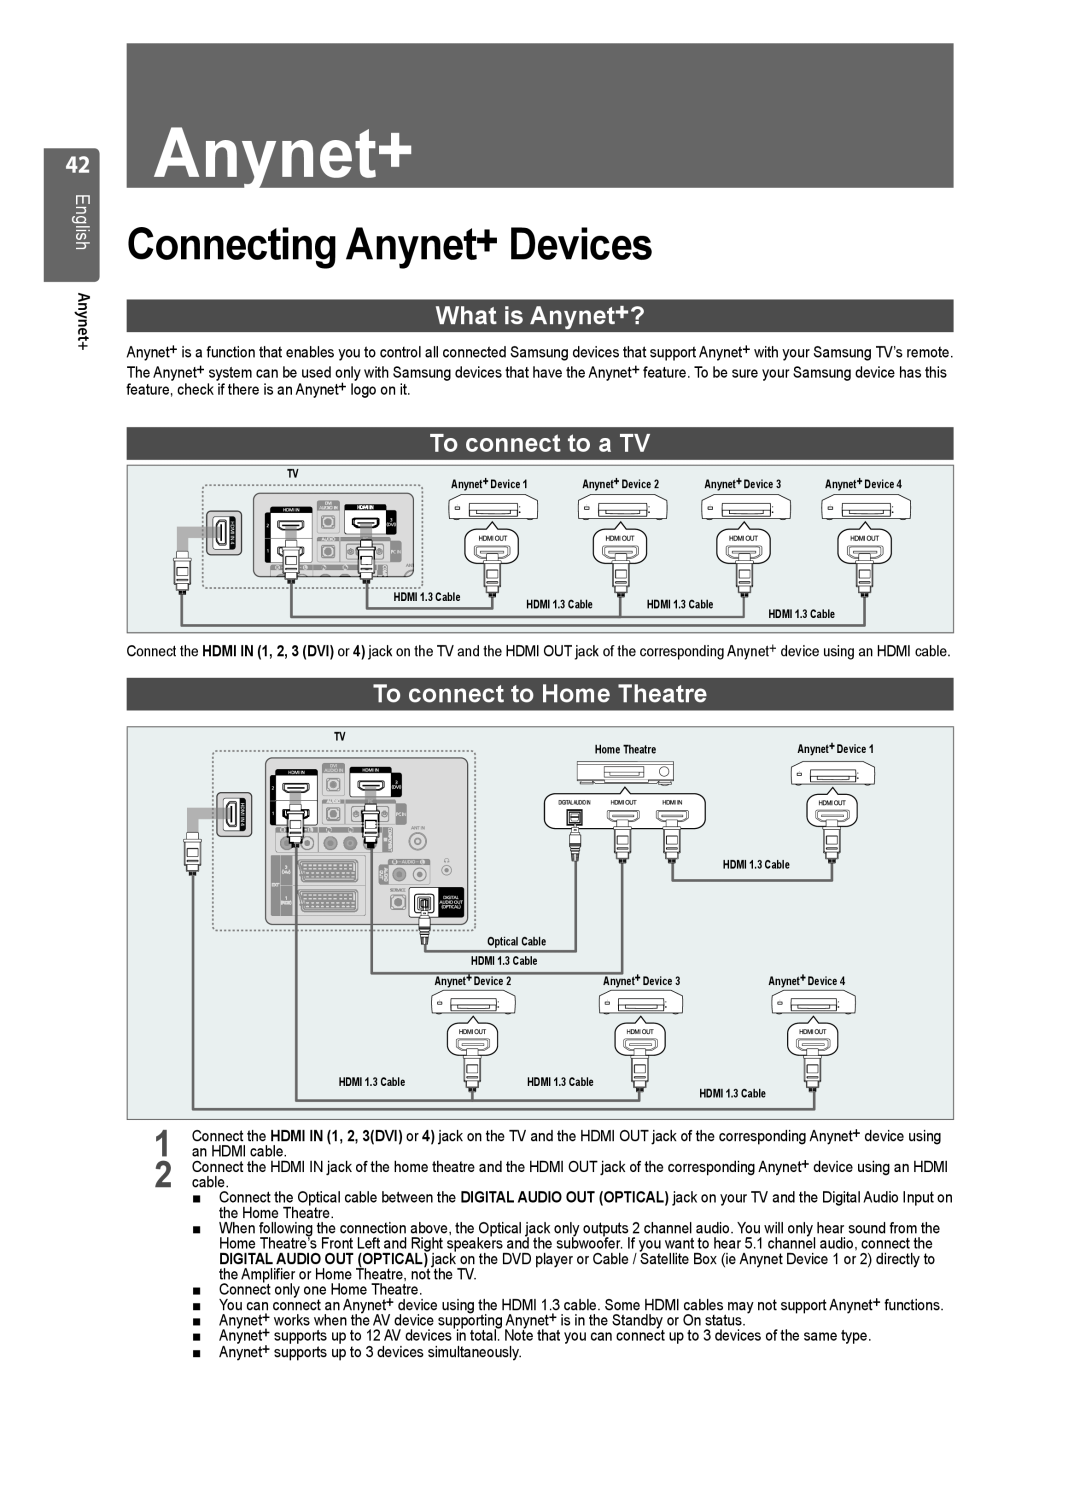 Samsung LE40B551 Connecting Anynet+ Devices, What is Anynet+?, To connect to a TV, To connect to Home Theatre 